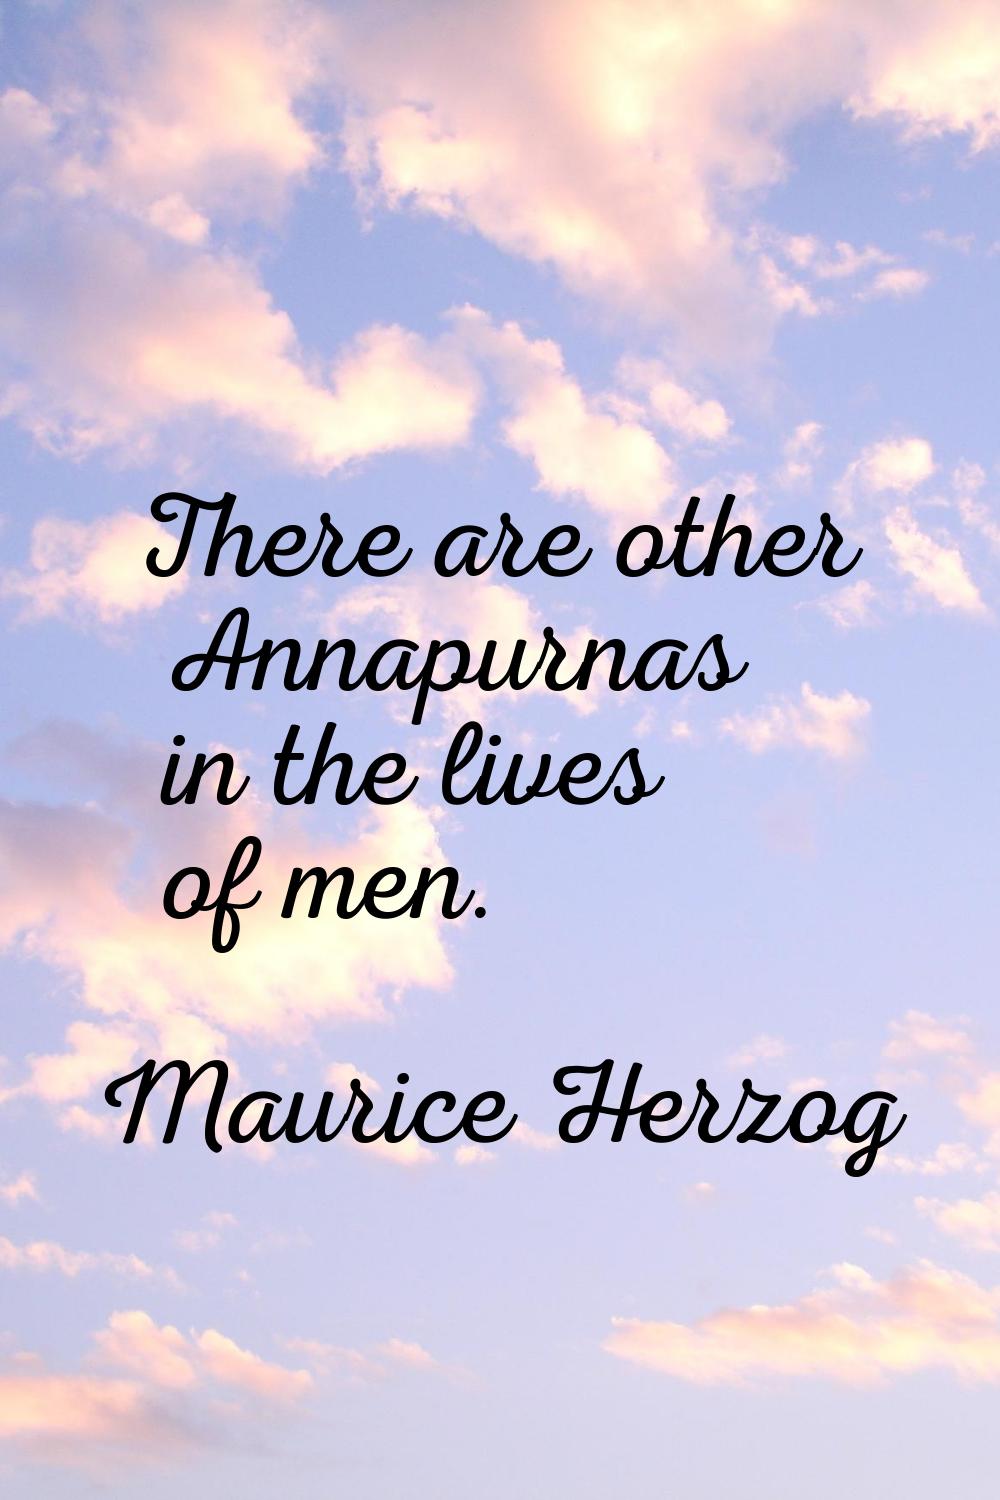 There are other Annapurnas in the lives of men.